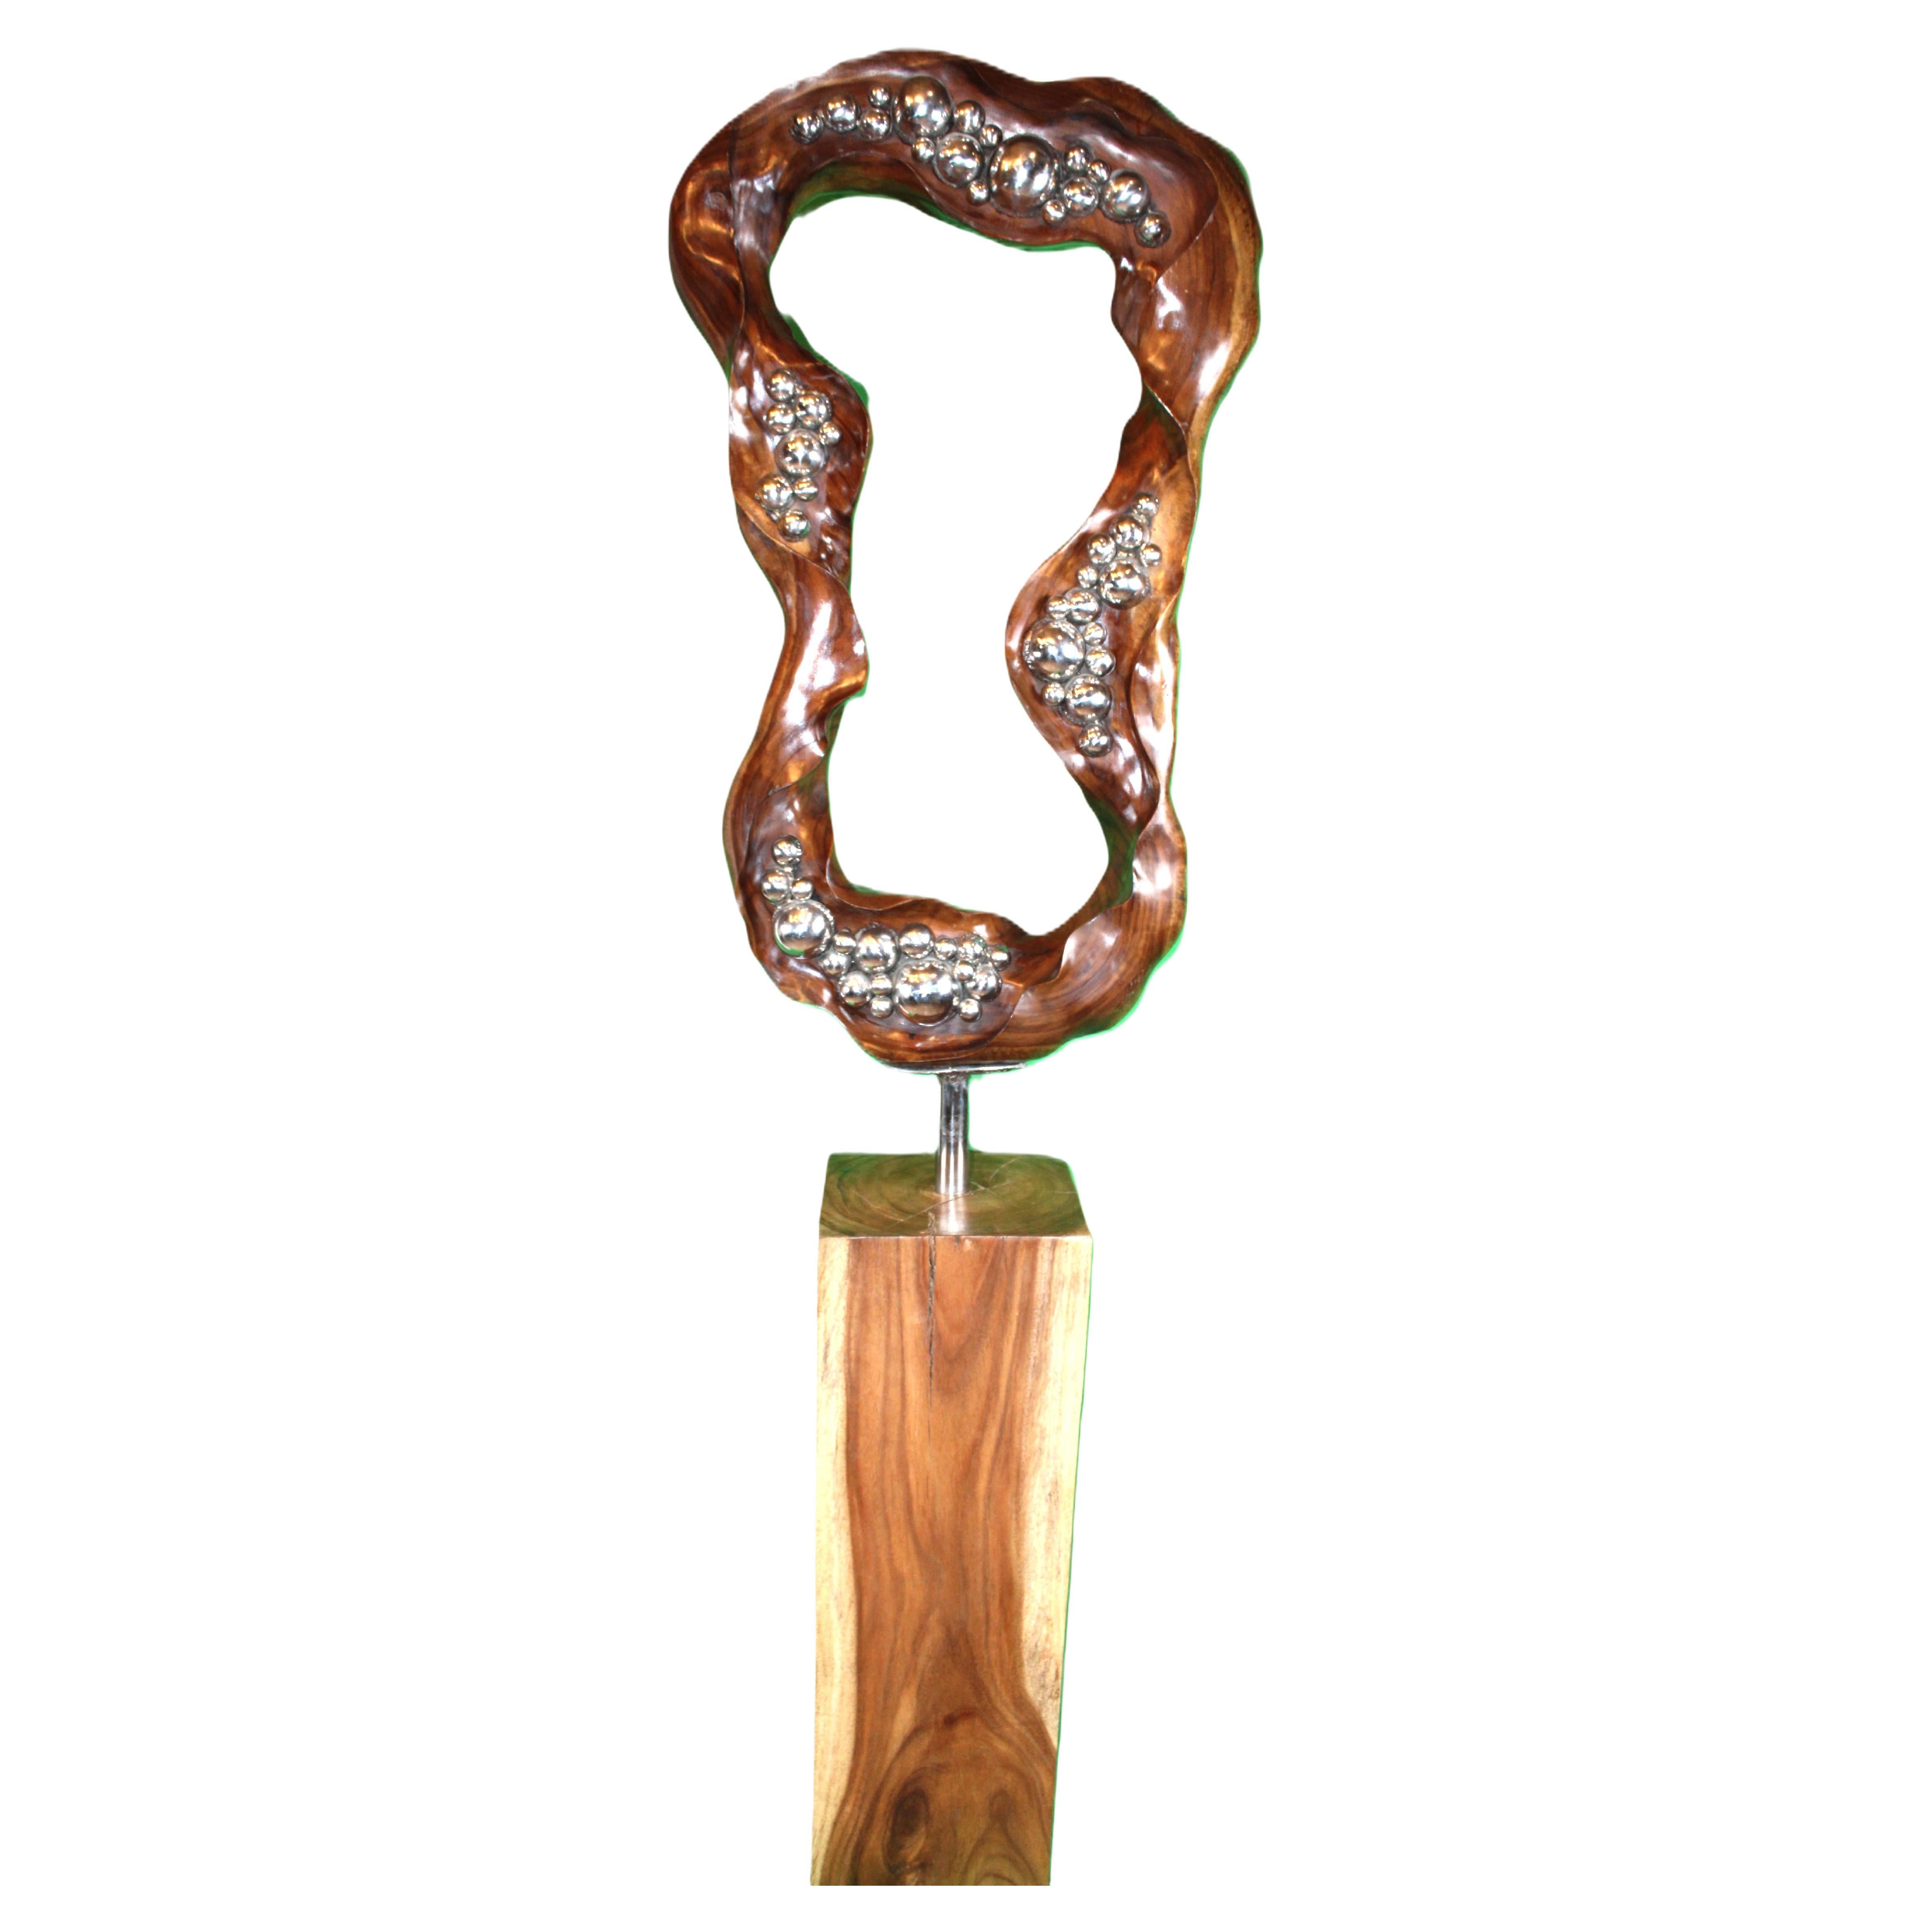 Harmony Unveiled: Balinese Abstract Wooden Sculpture For Sale